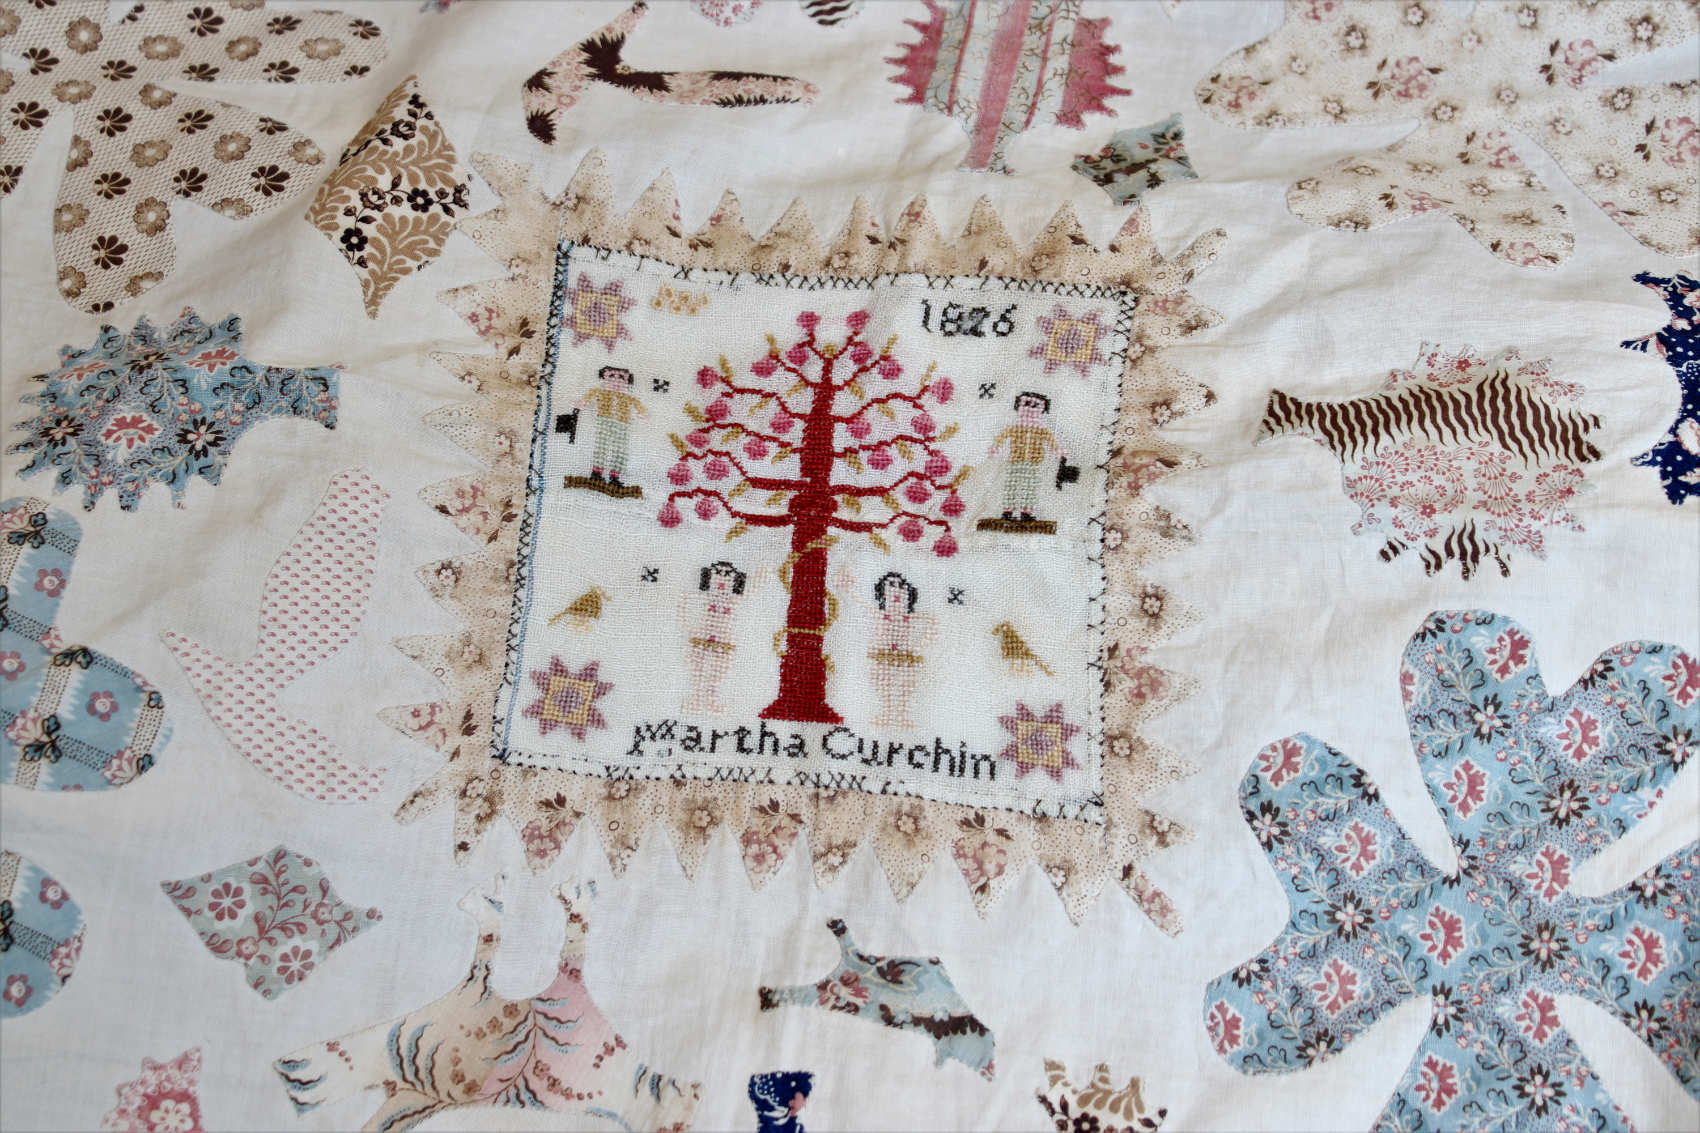 A Detail of an Unusual Early 19th Century Cotton Coverlet, centred with a sampler worked by Martha Curchin